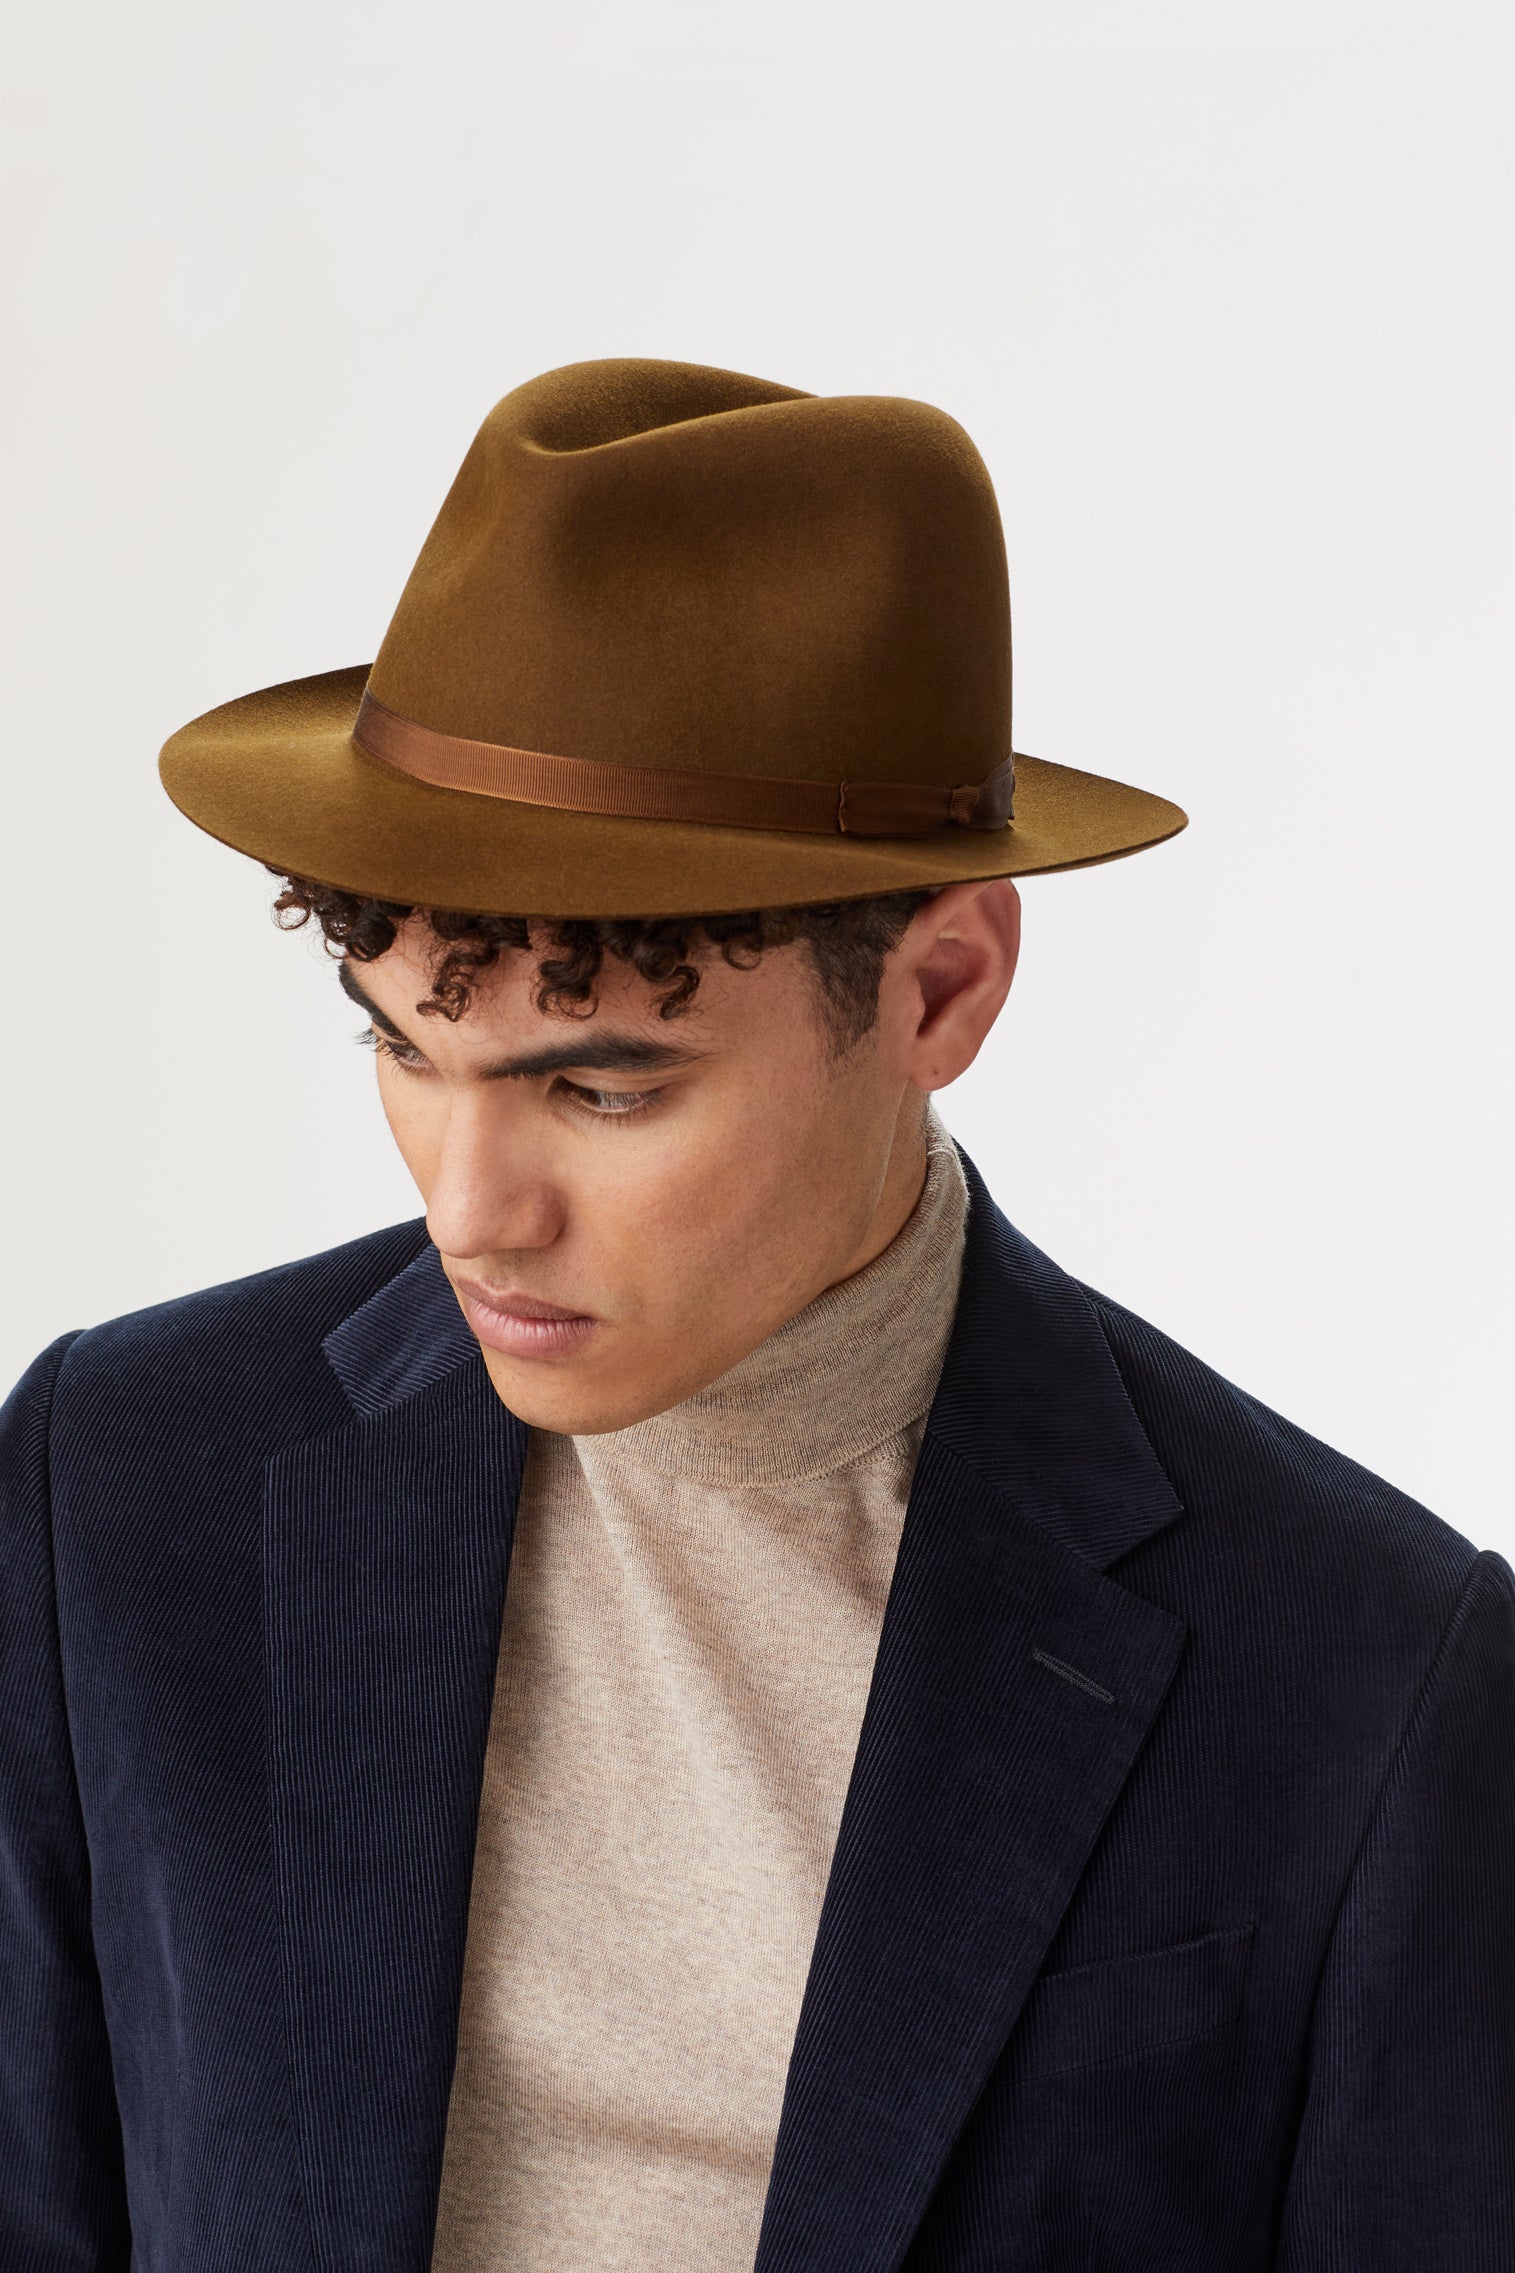 Voyager Rollable Trilby - Best Selling Hats - Lock & Co. Hatters London UK